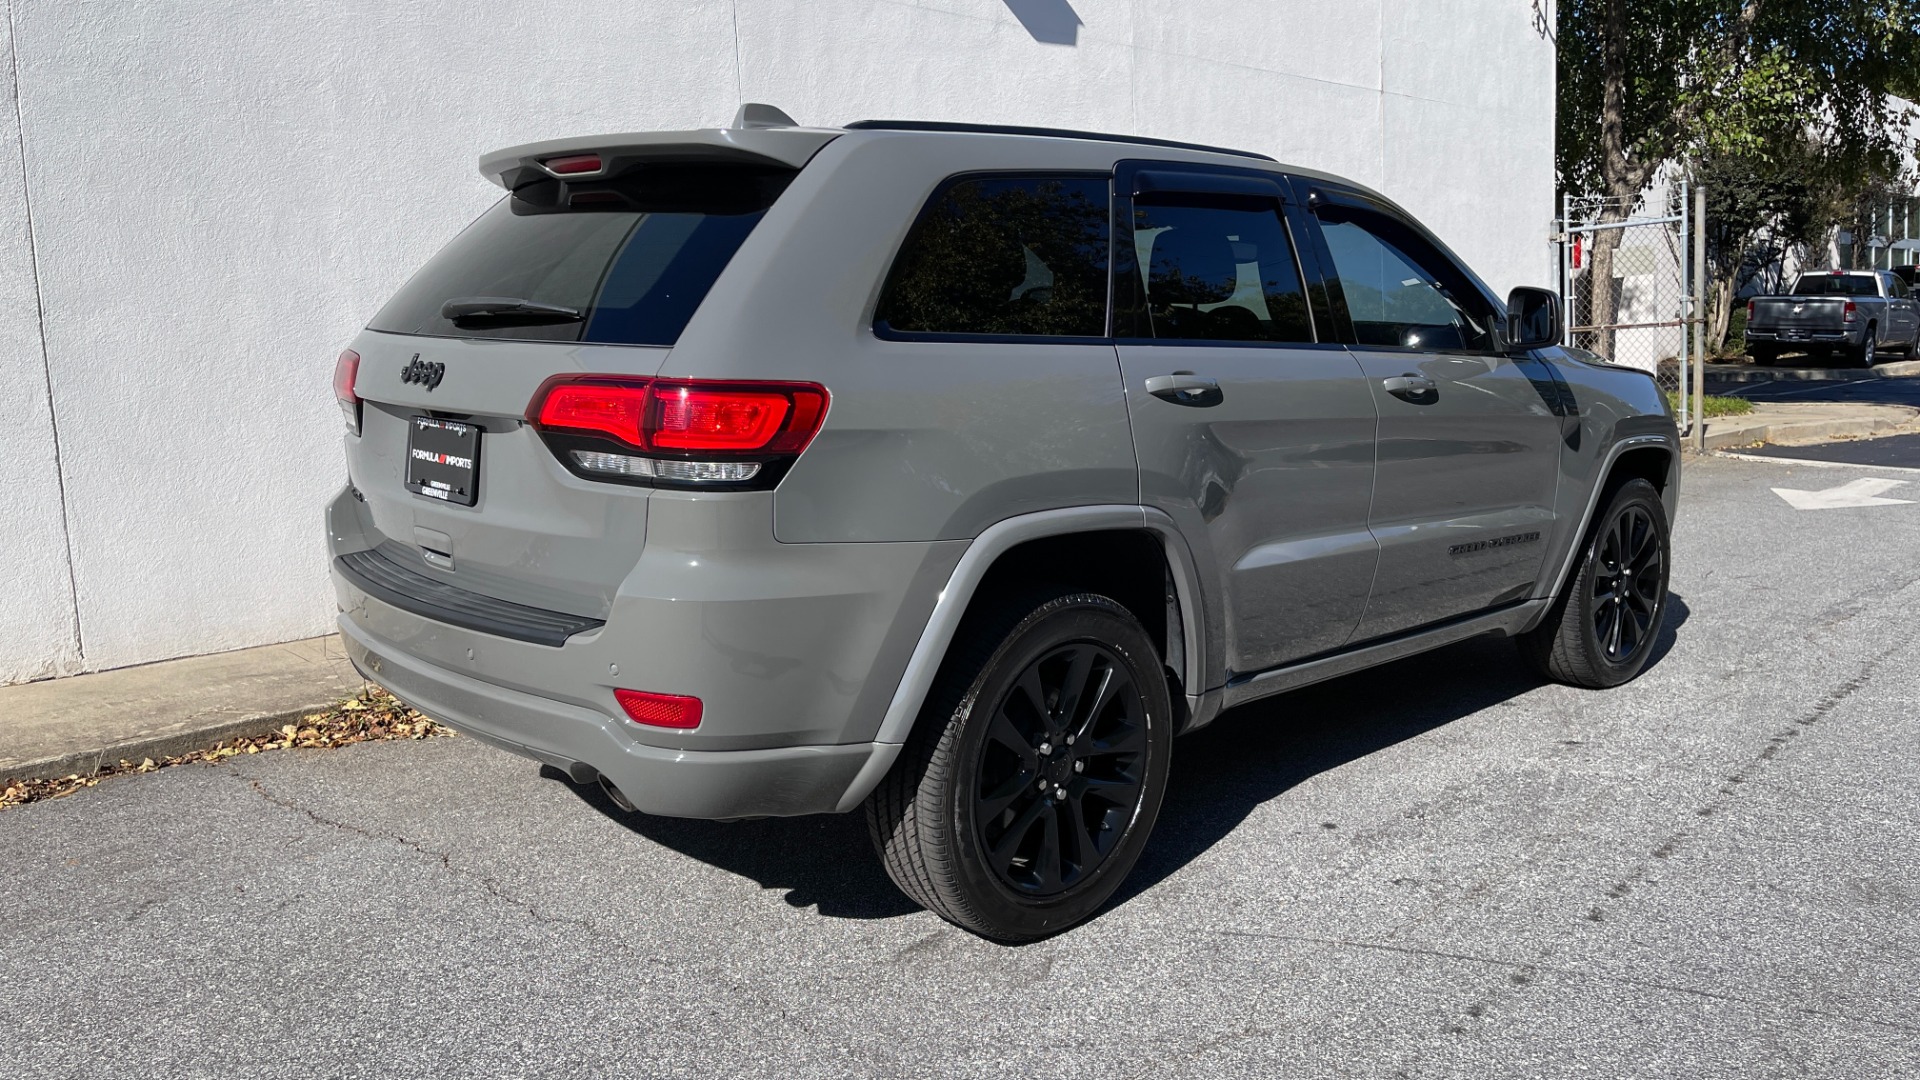 Used 2019 Jeep Grand Cherokee ALTITUDE / BLACK 20IN WHEELS / BLACK TRIM / SUNROOF / HEATED SEATS for sale $34,495 at Formula Imports in Charlotte NC 28227 8